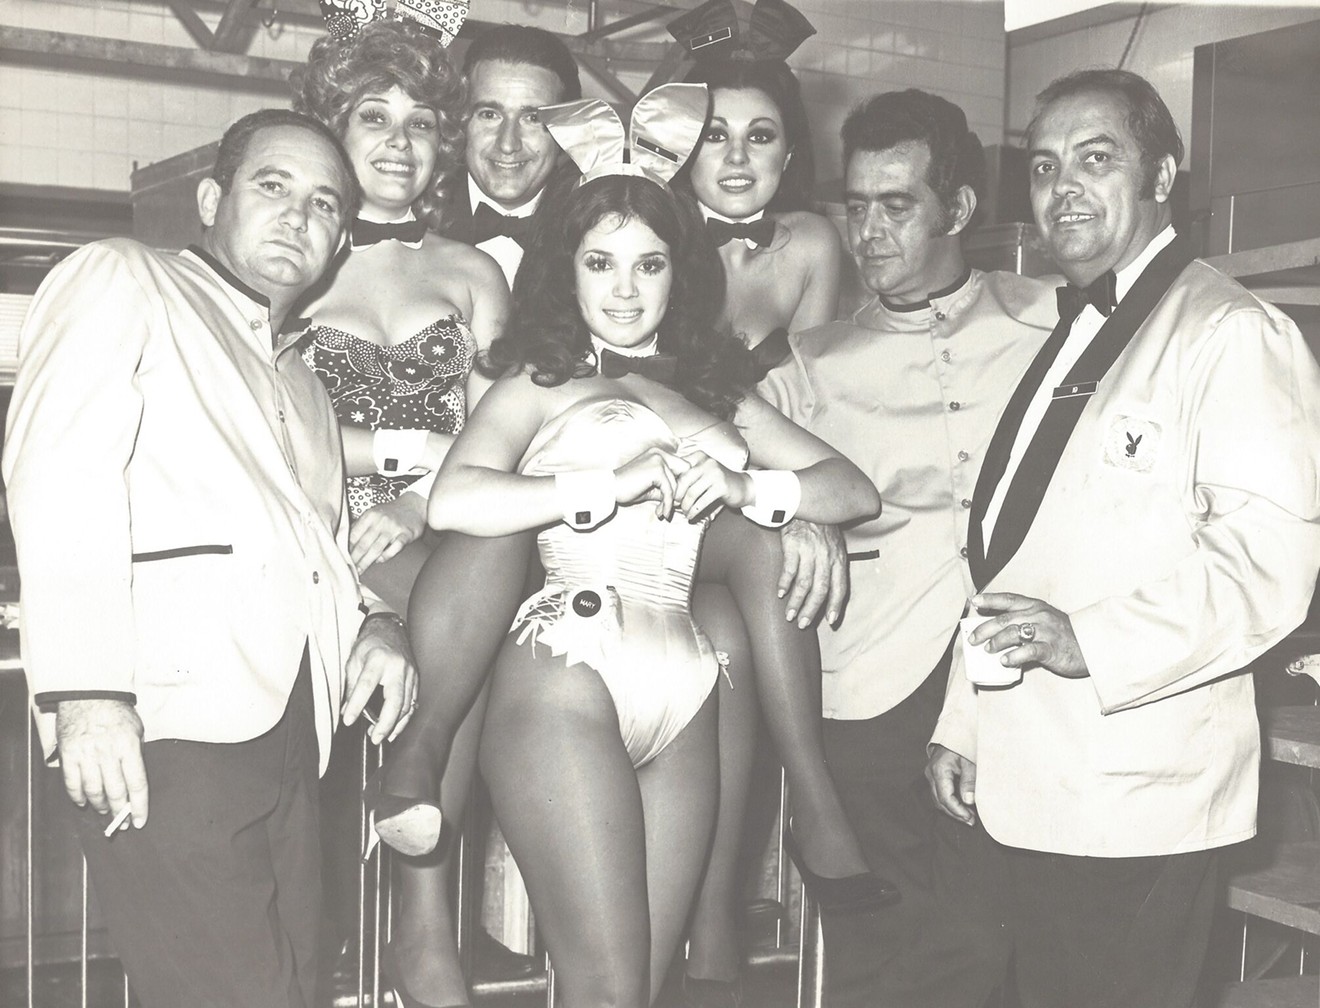 Bobbie Walters and her fellow Playboy Bunnies at a Playboy Club in the 1970s.